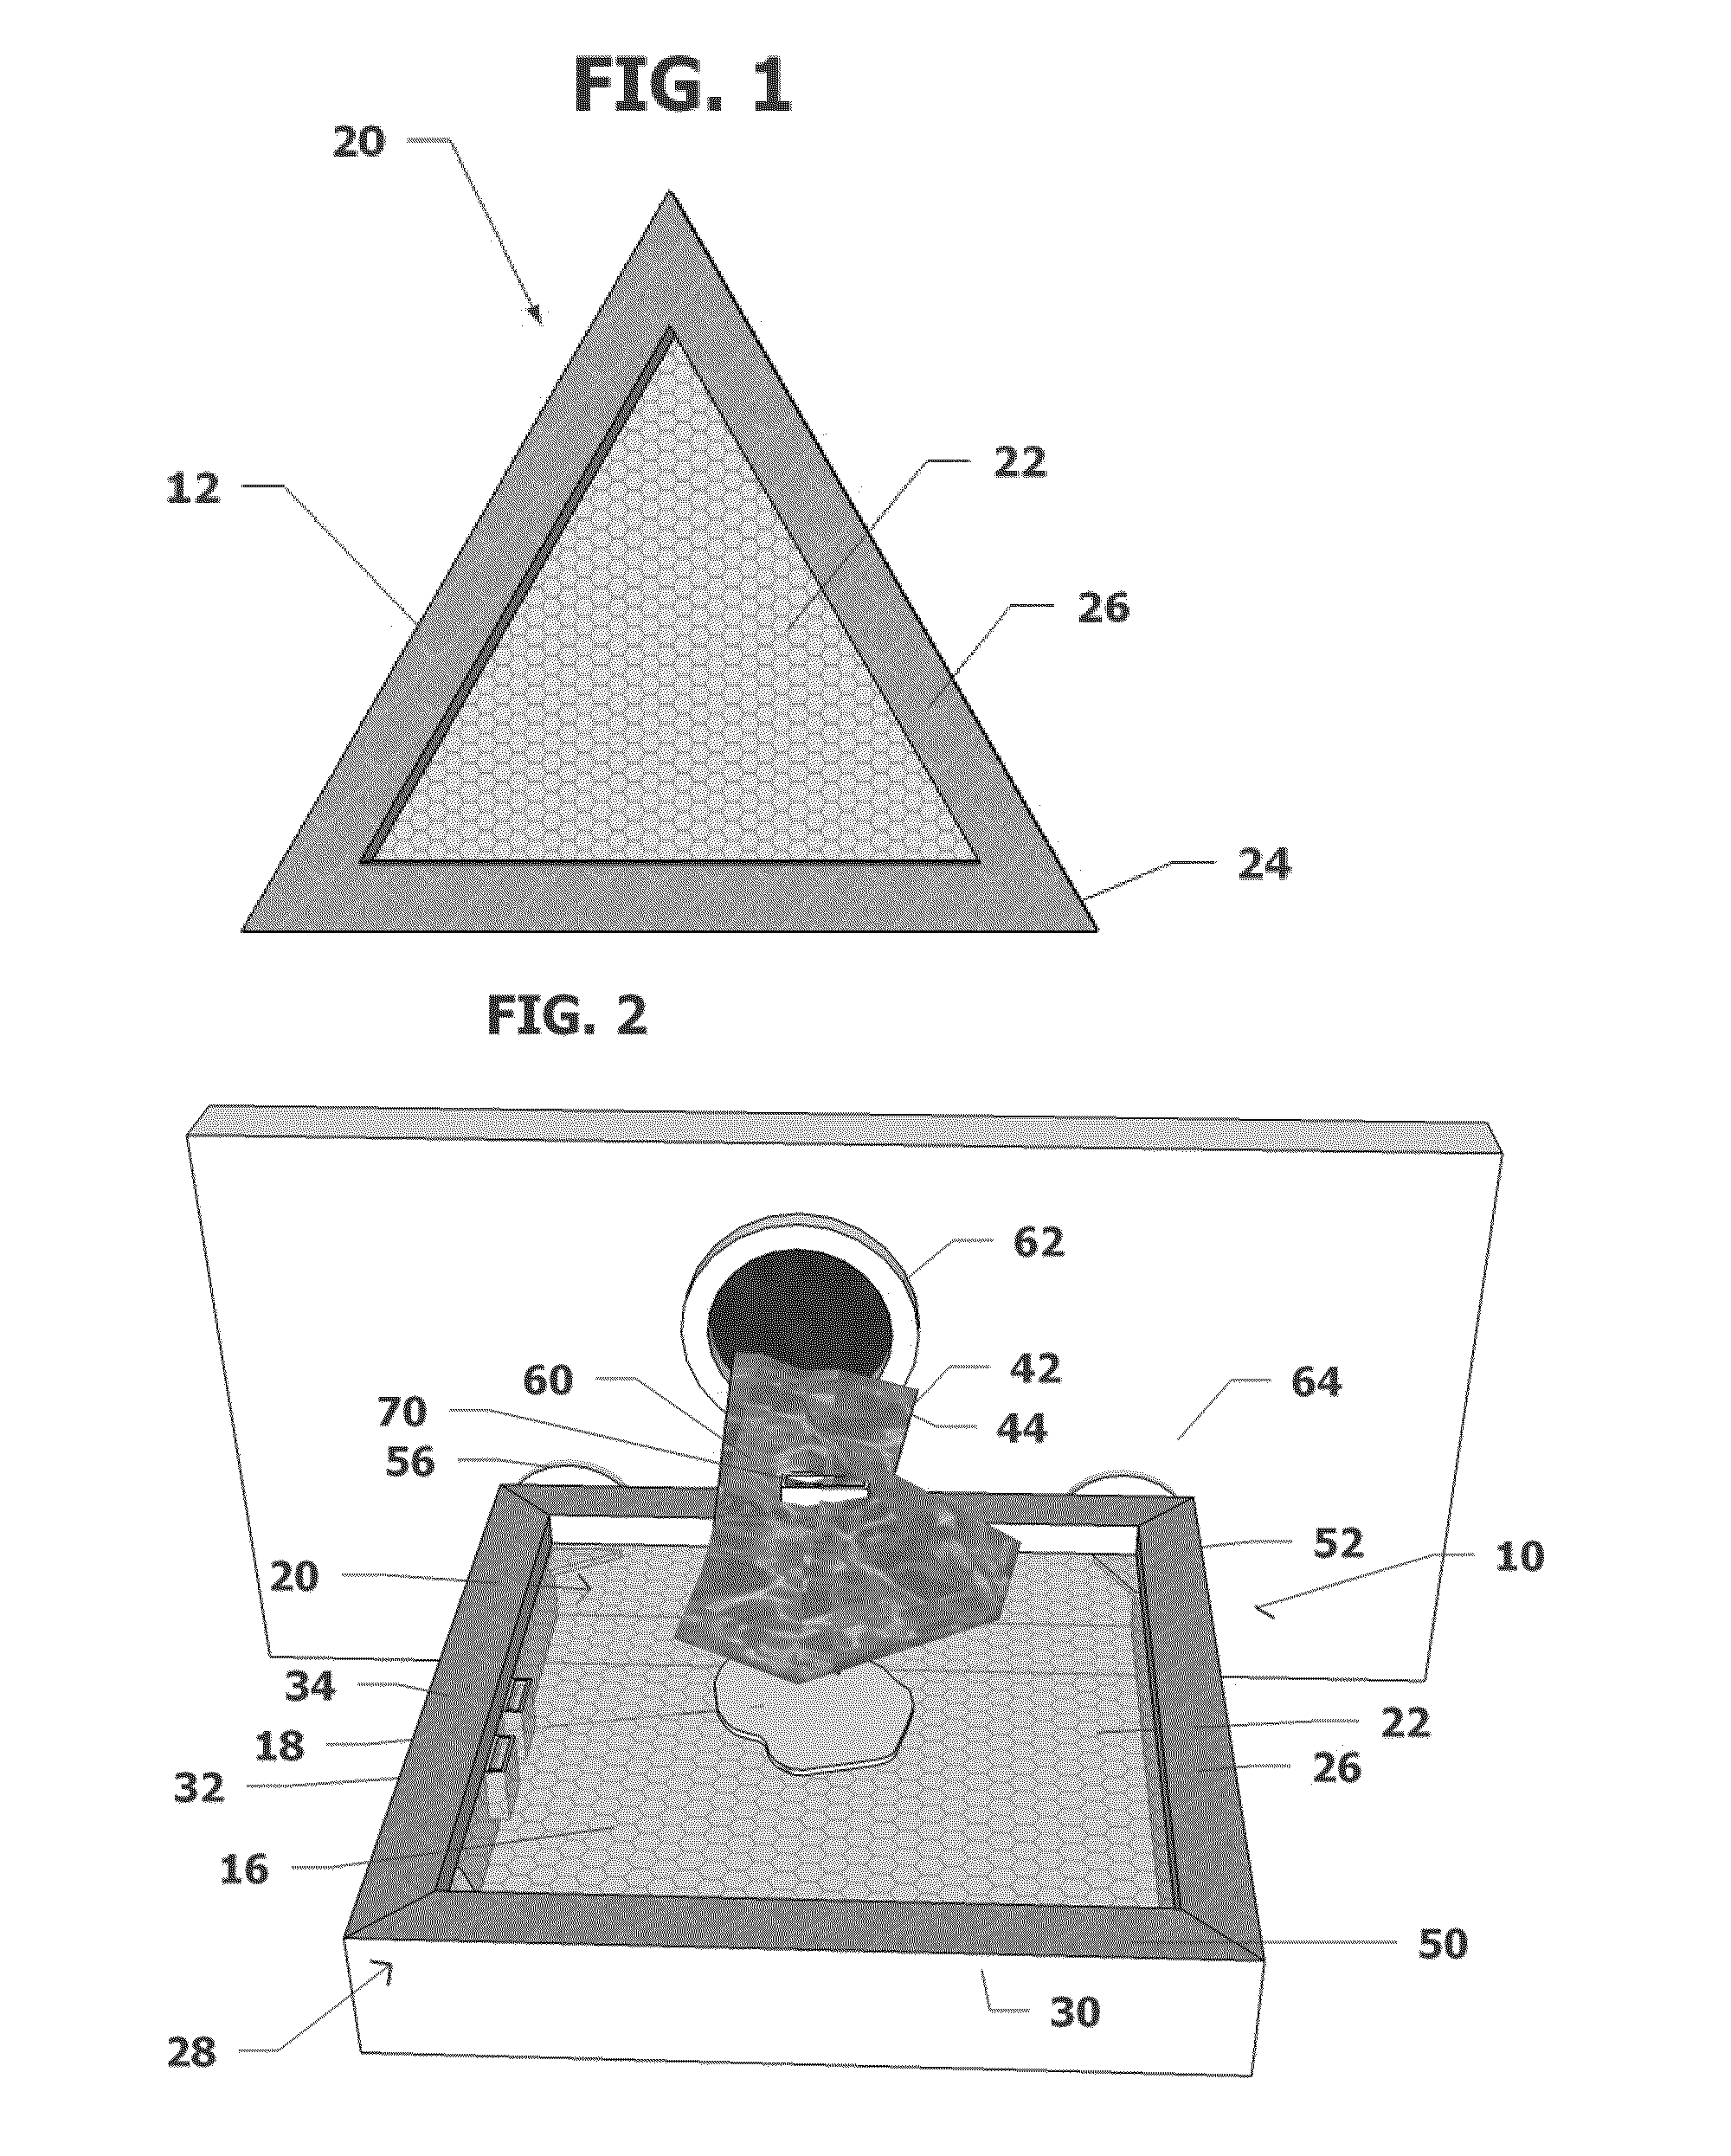 External Filtering and Absorbing Device for Use in a Local Containment Area